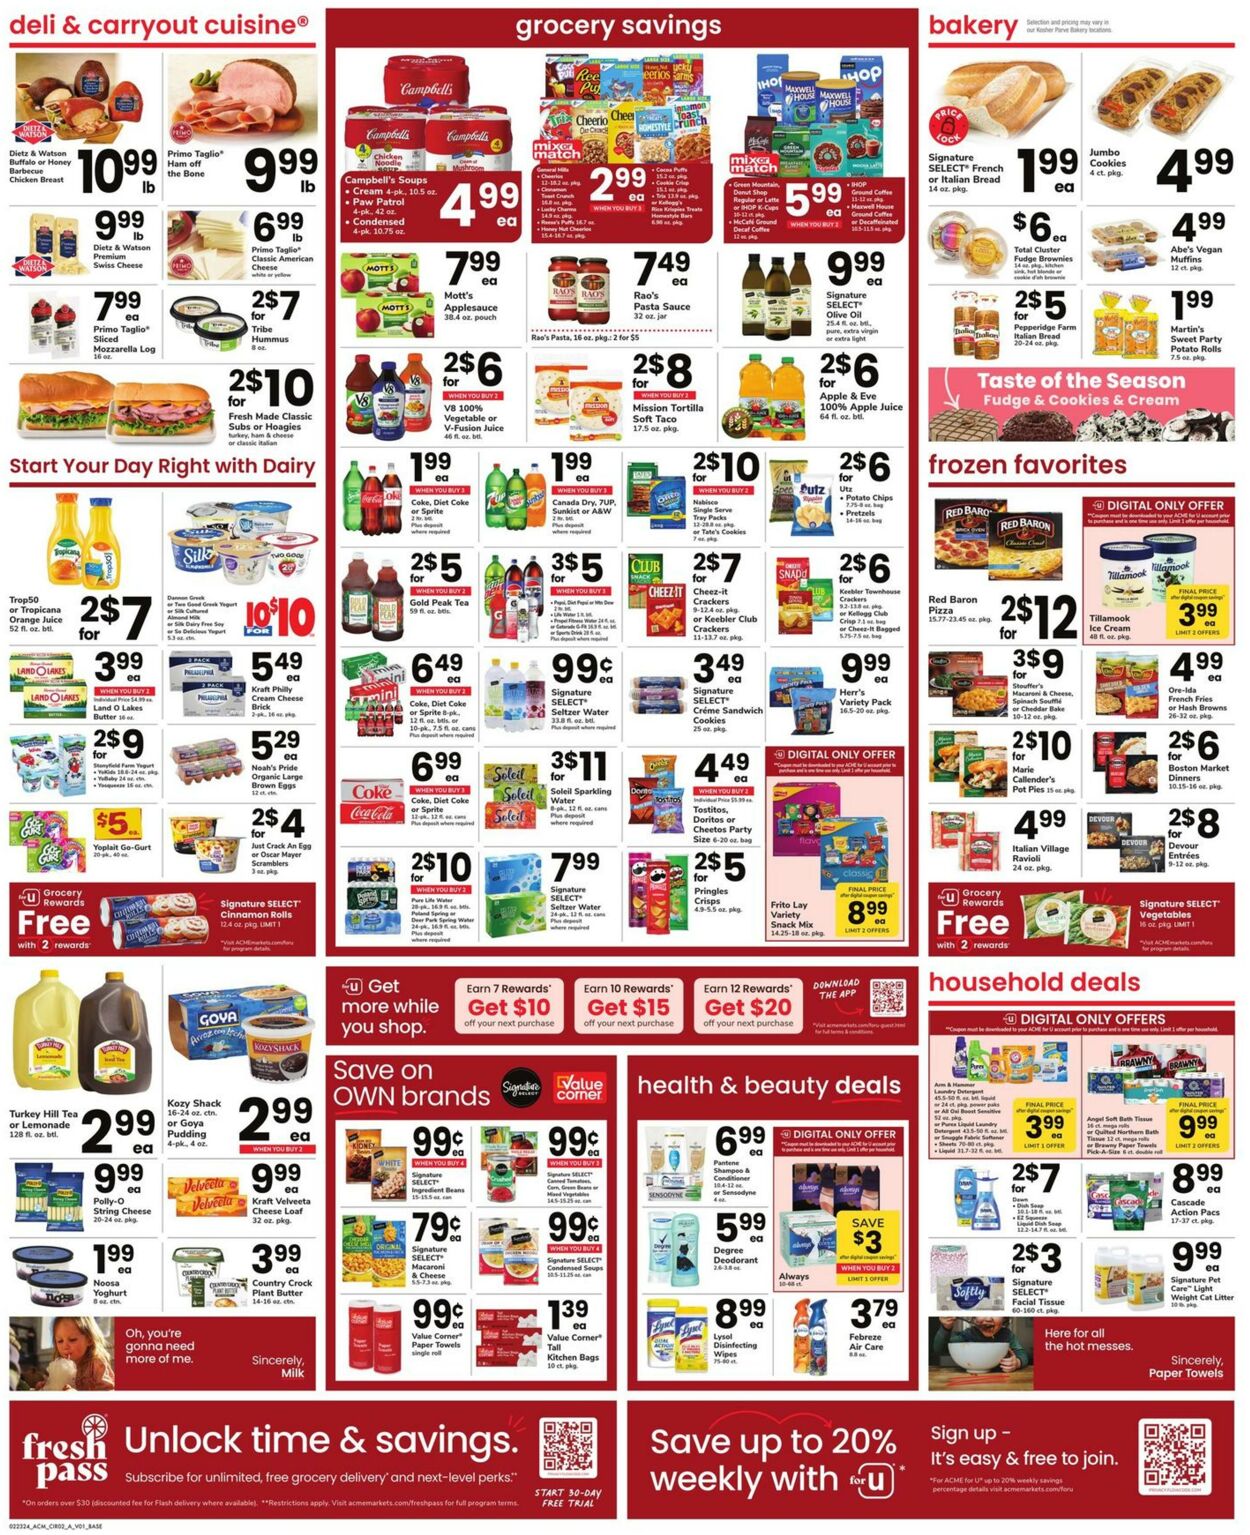 Acme Ad from 02/23/2024